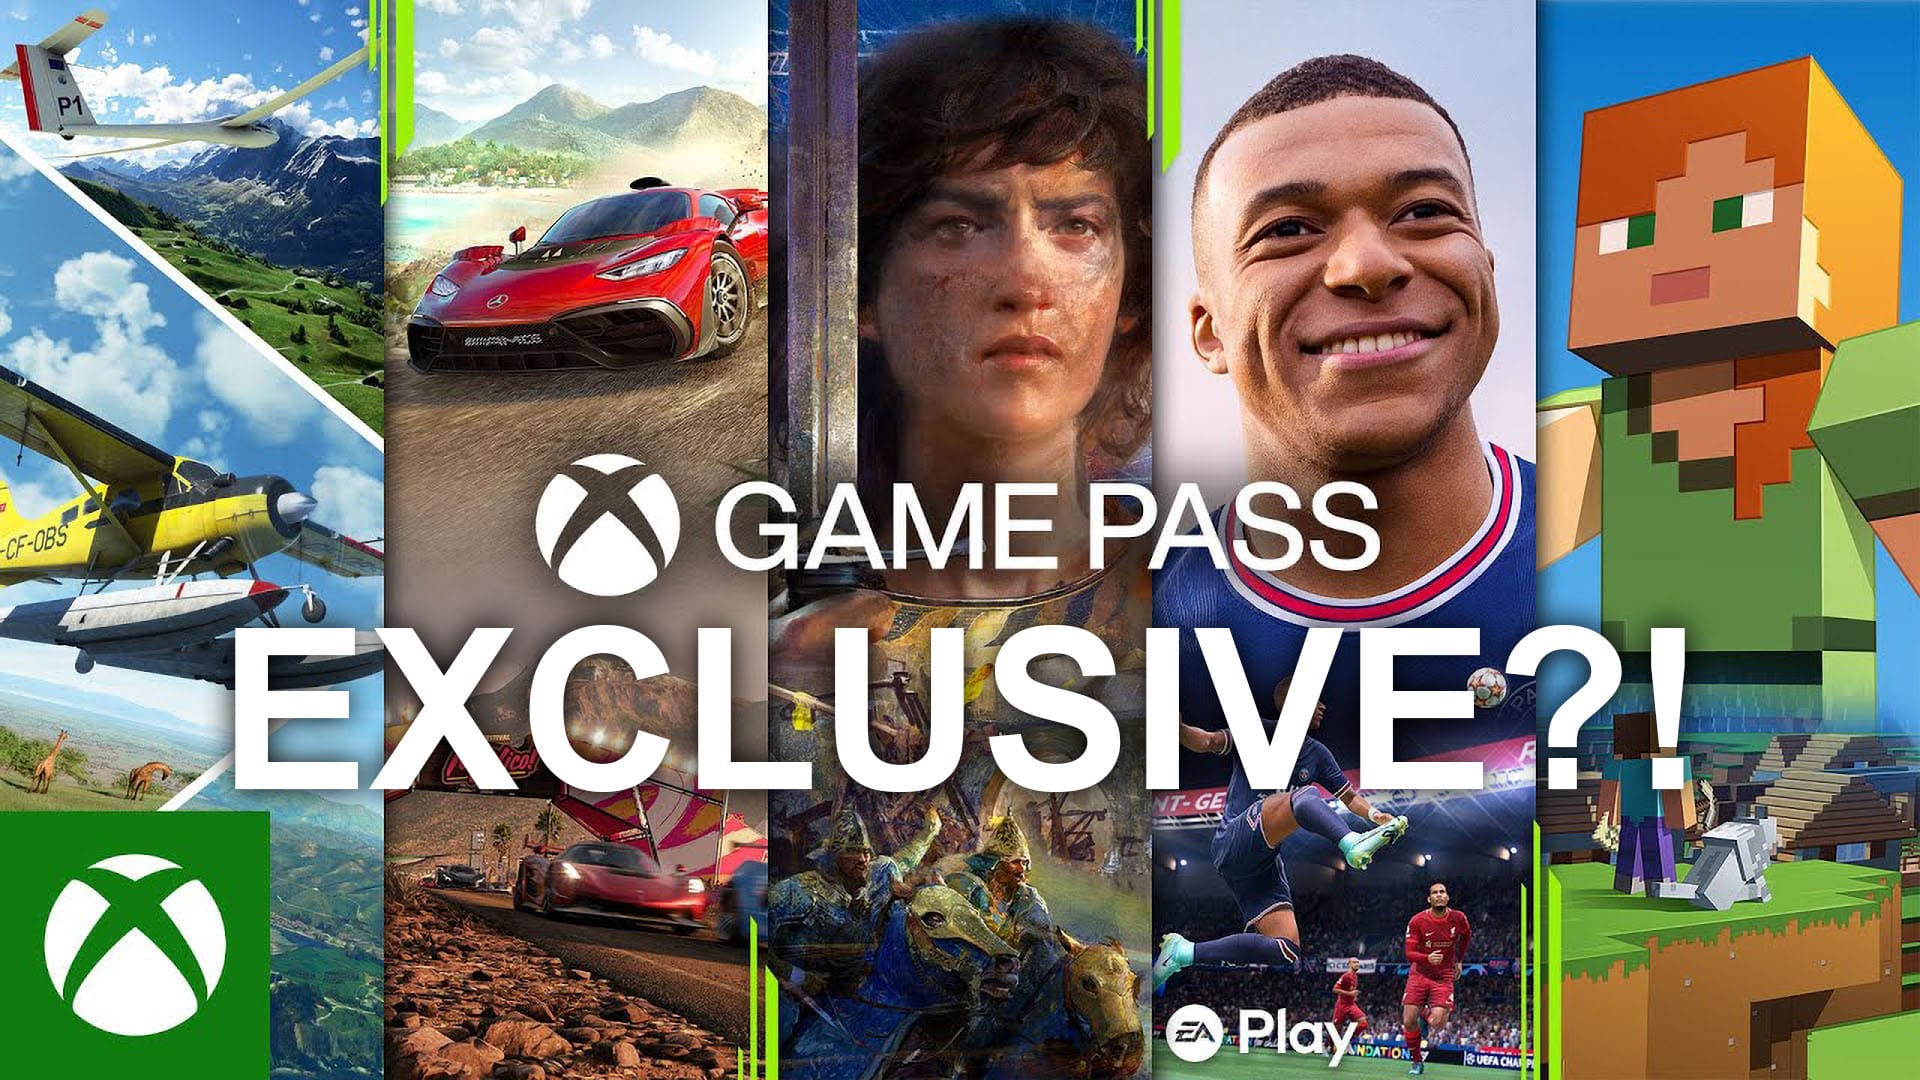 Phil Spencer hints at a future Game Pass price hike